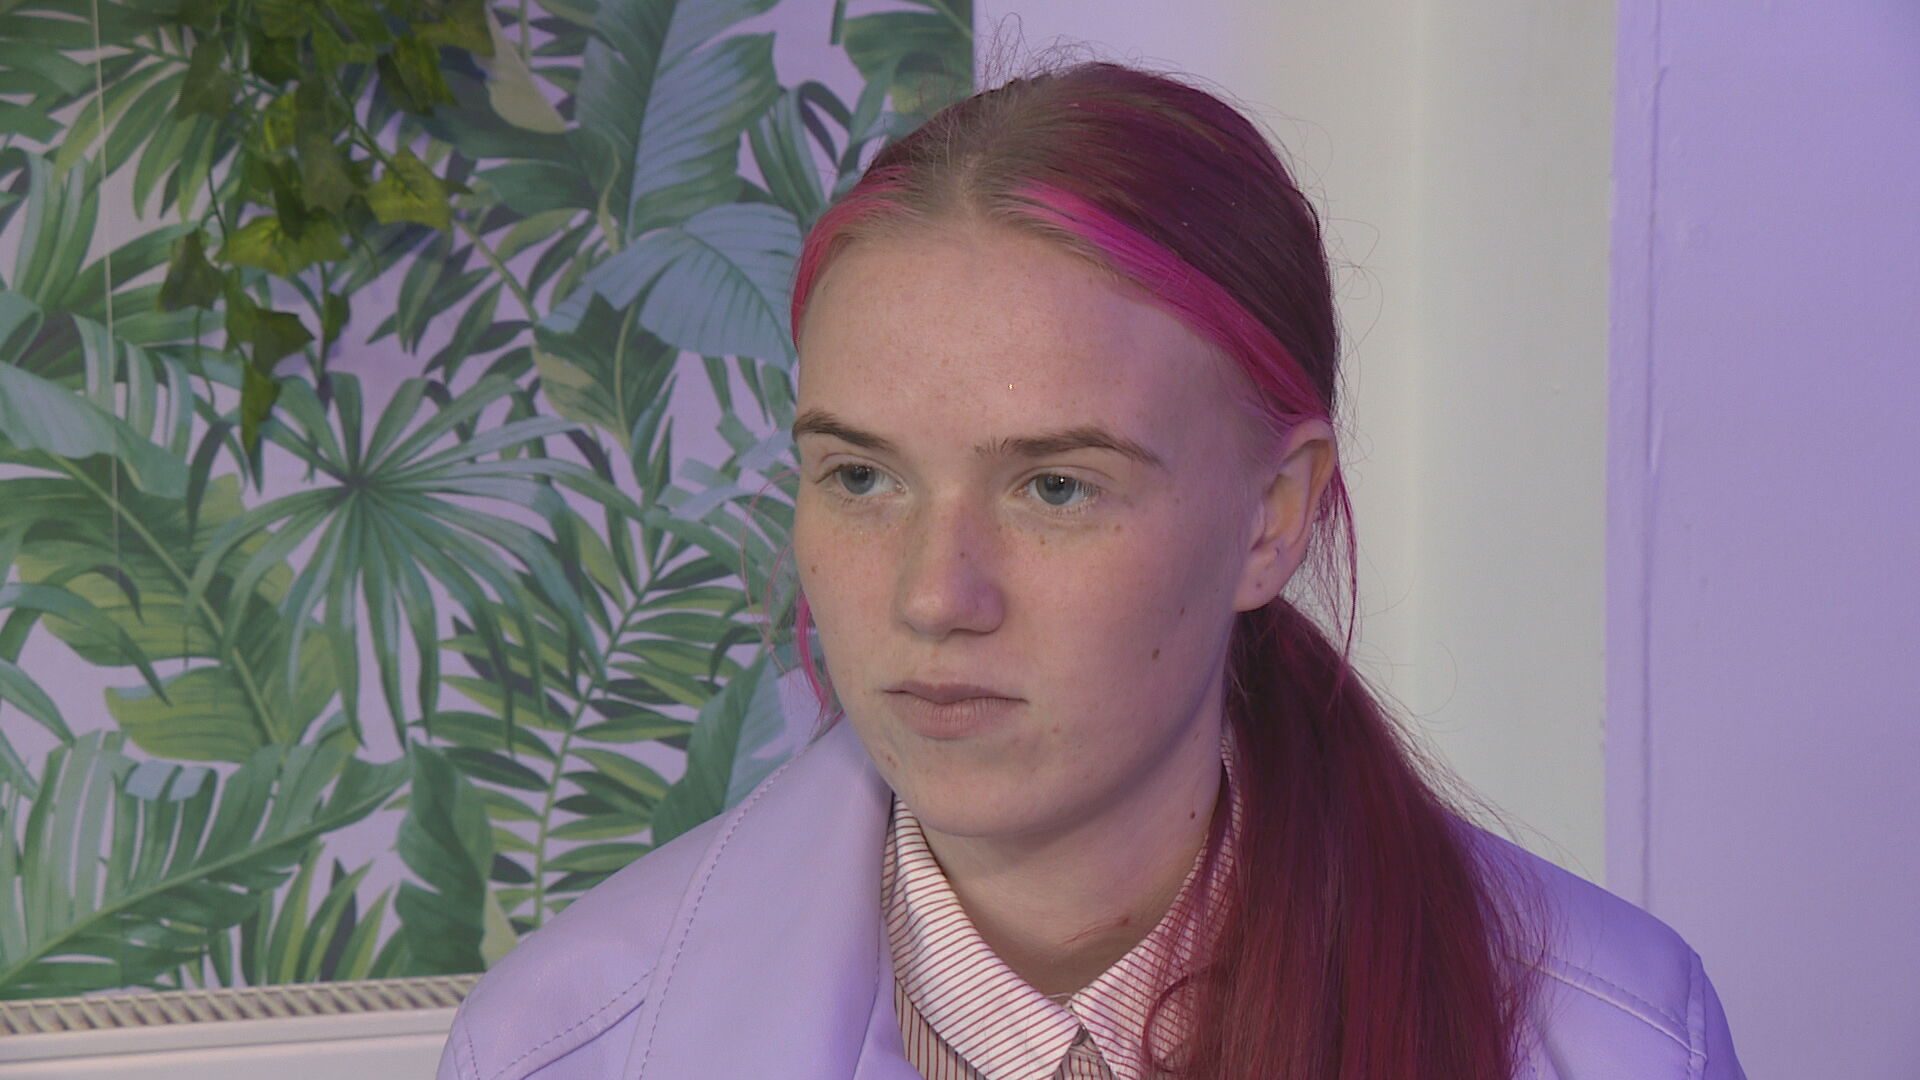 Chantelle Conaghan, 19, said G20 community group gets her off the streets.